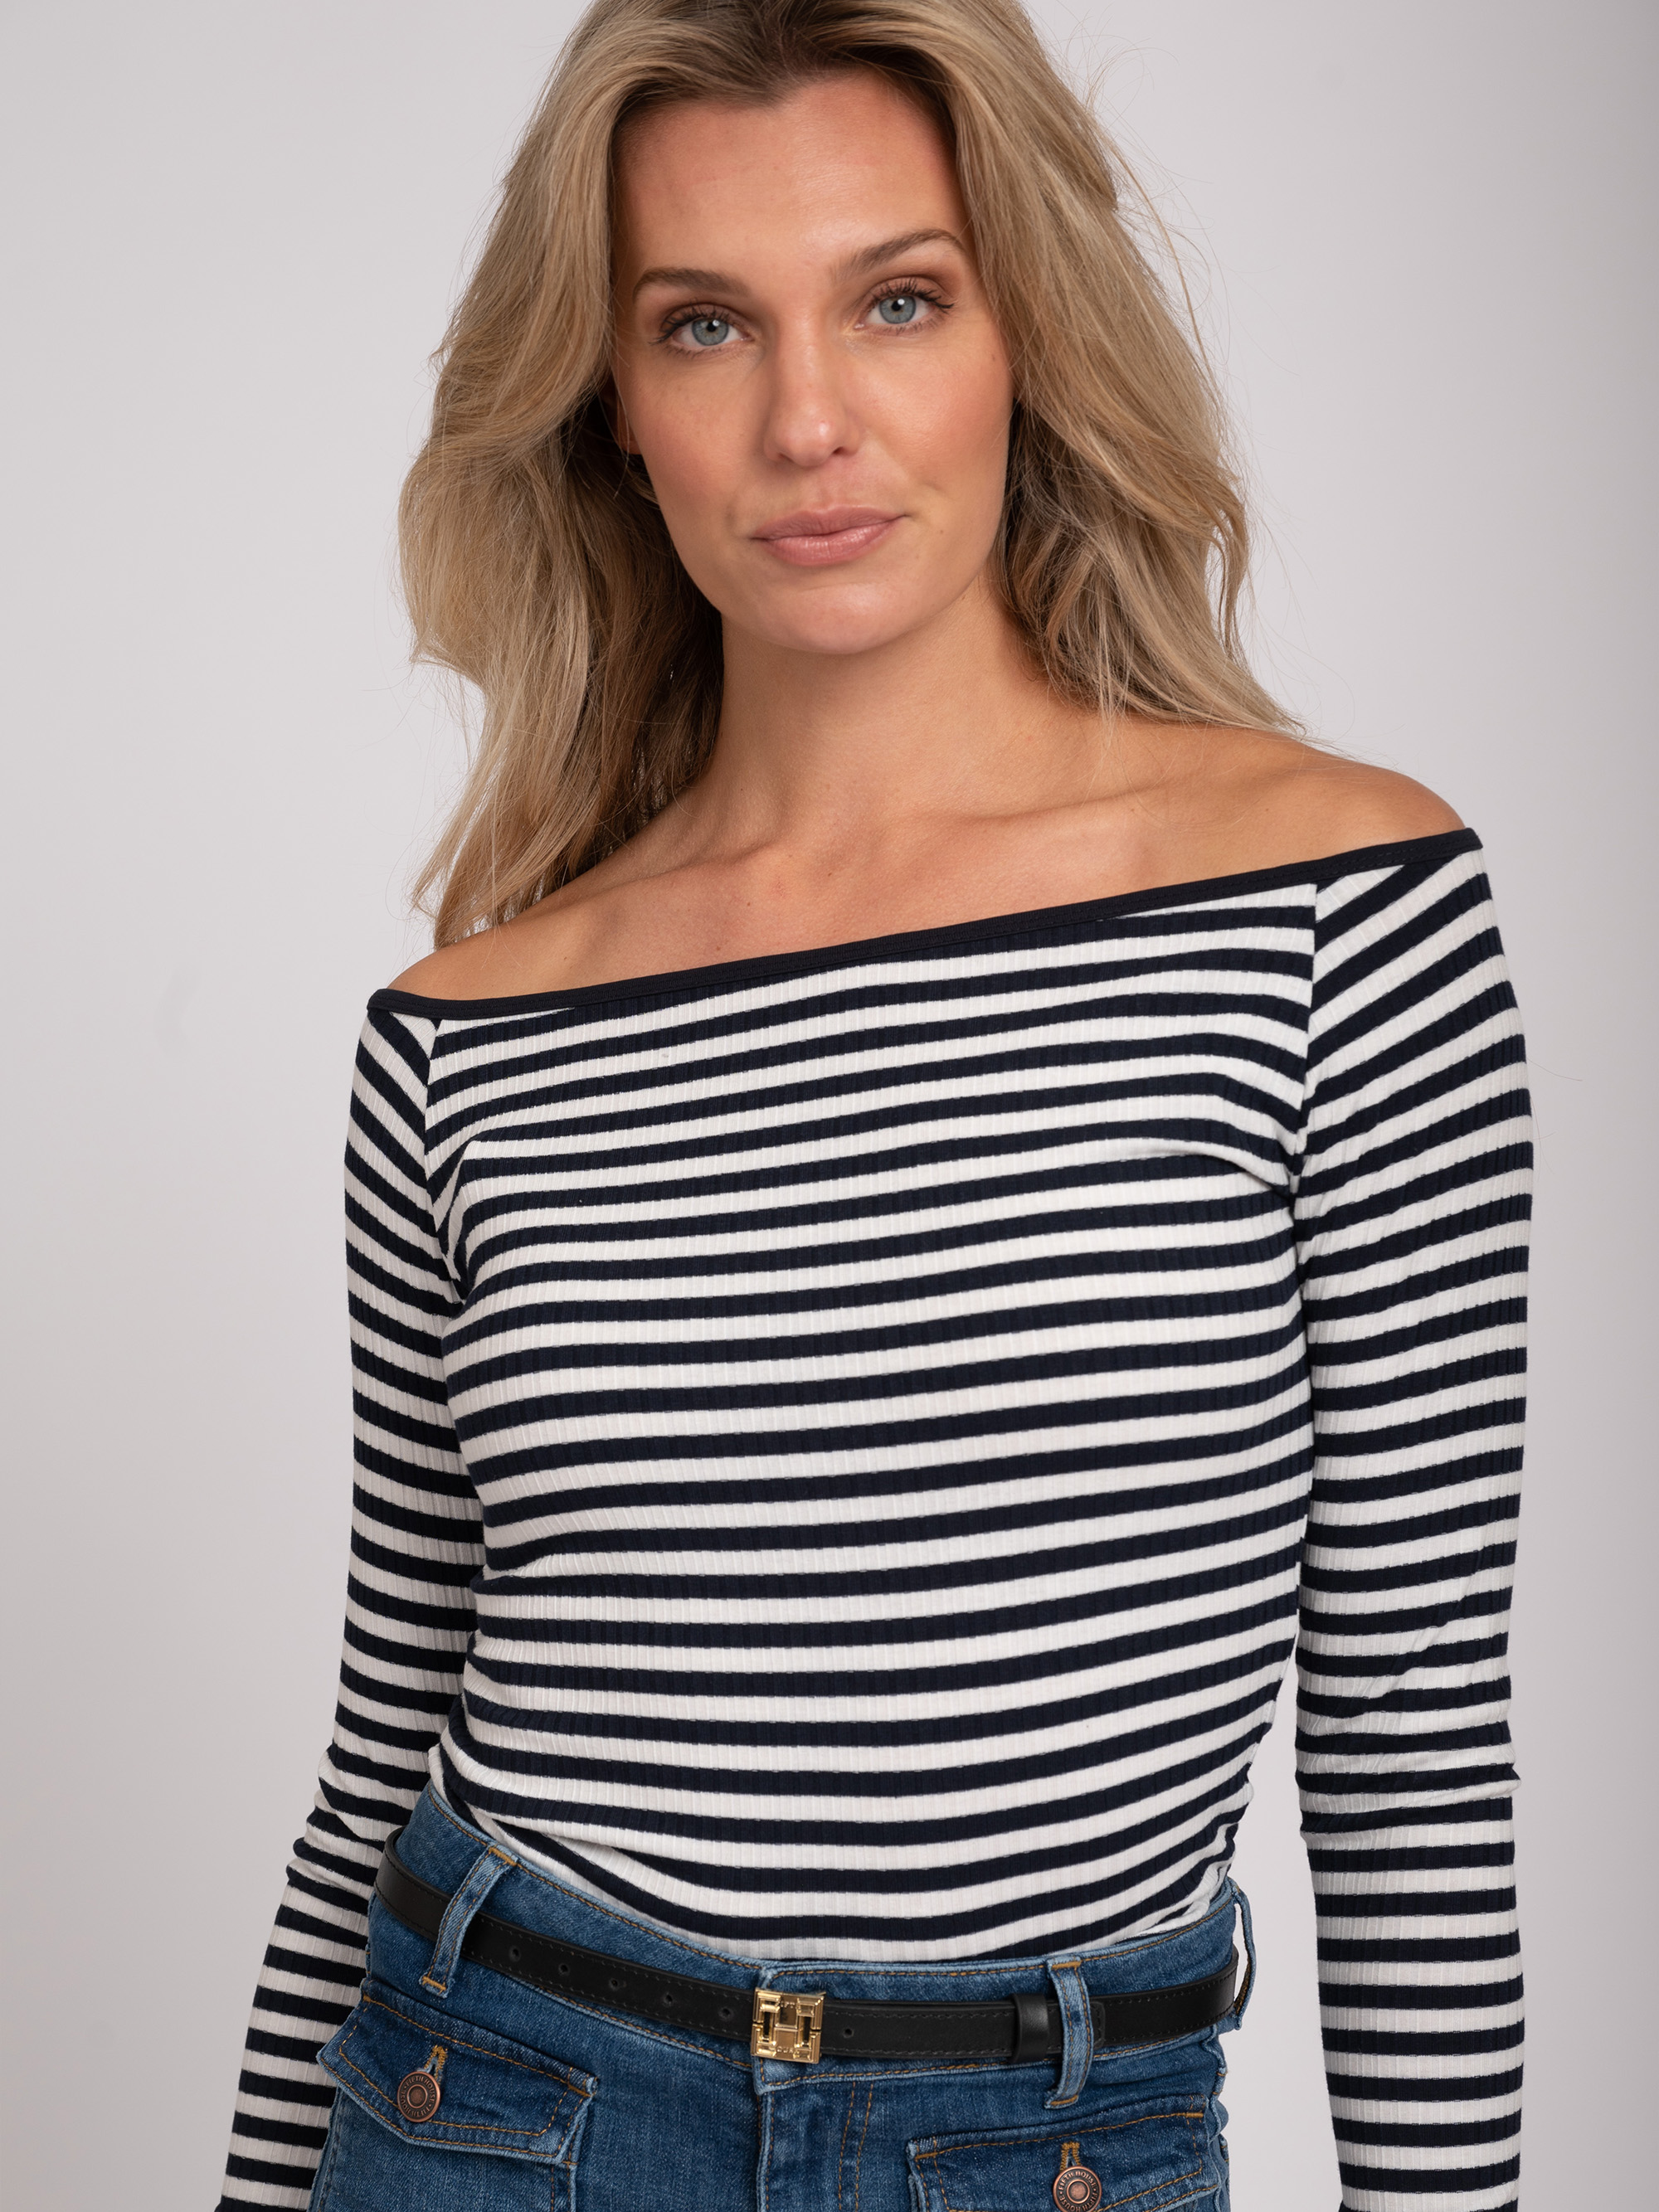 Stipped top boat neck